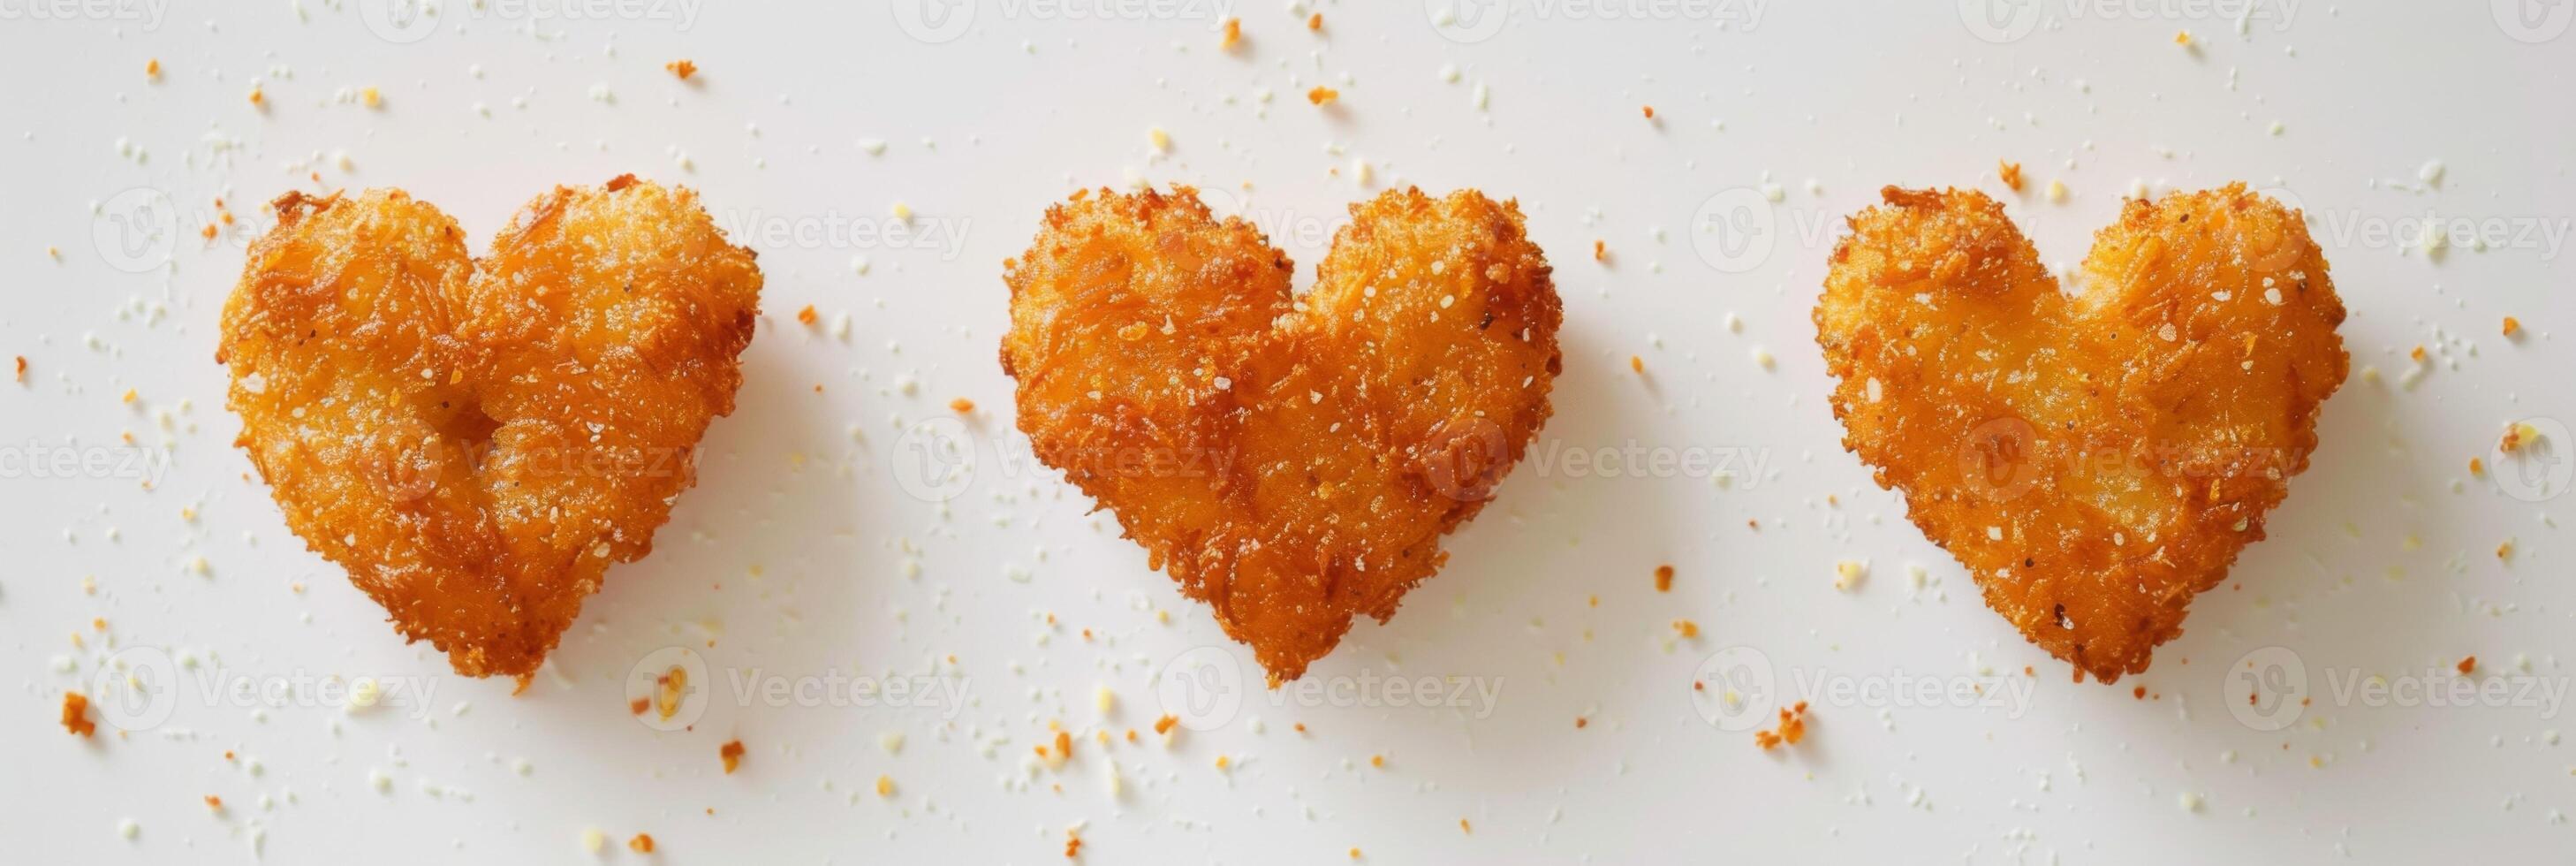 AI generated Mozzarella sticks shaped into hearts show cheese, fried appetizer and snack food against a white background photo